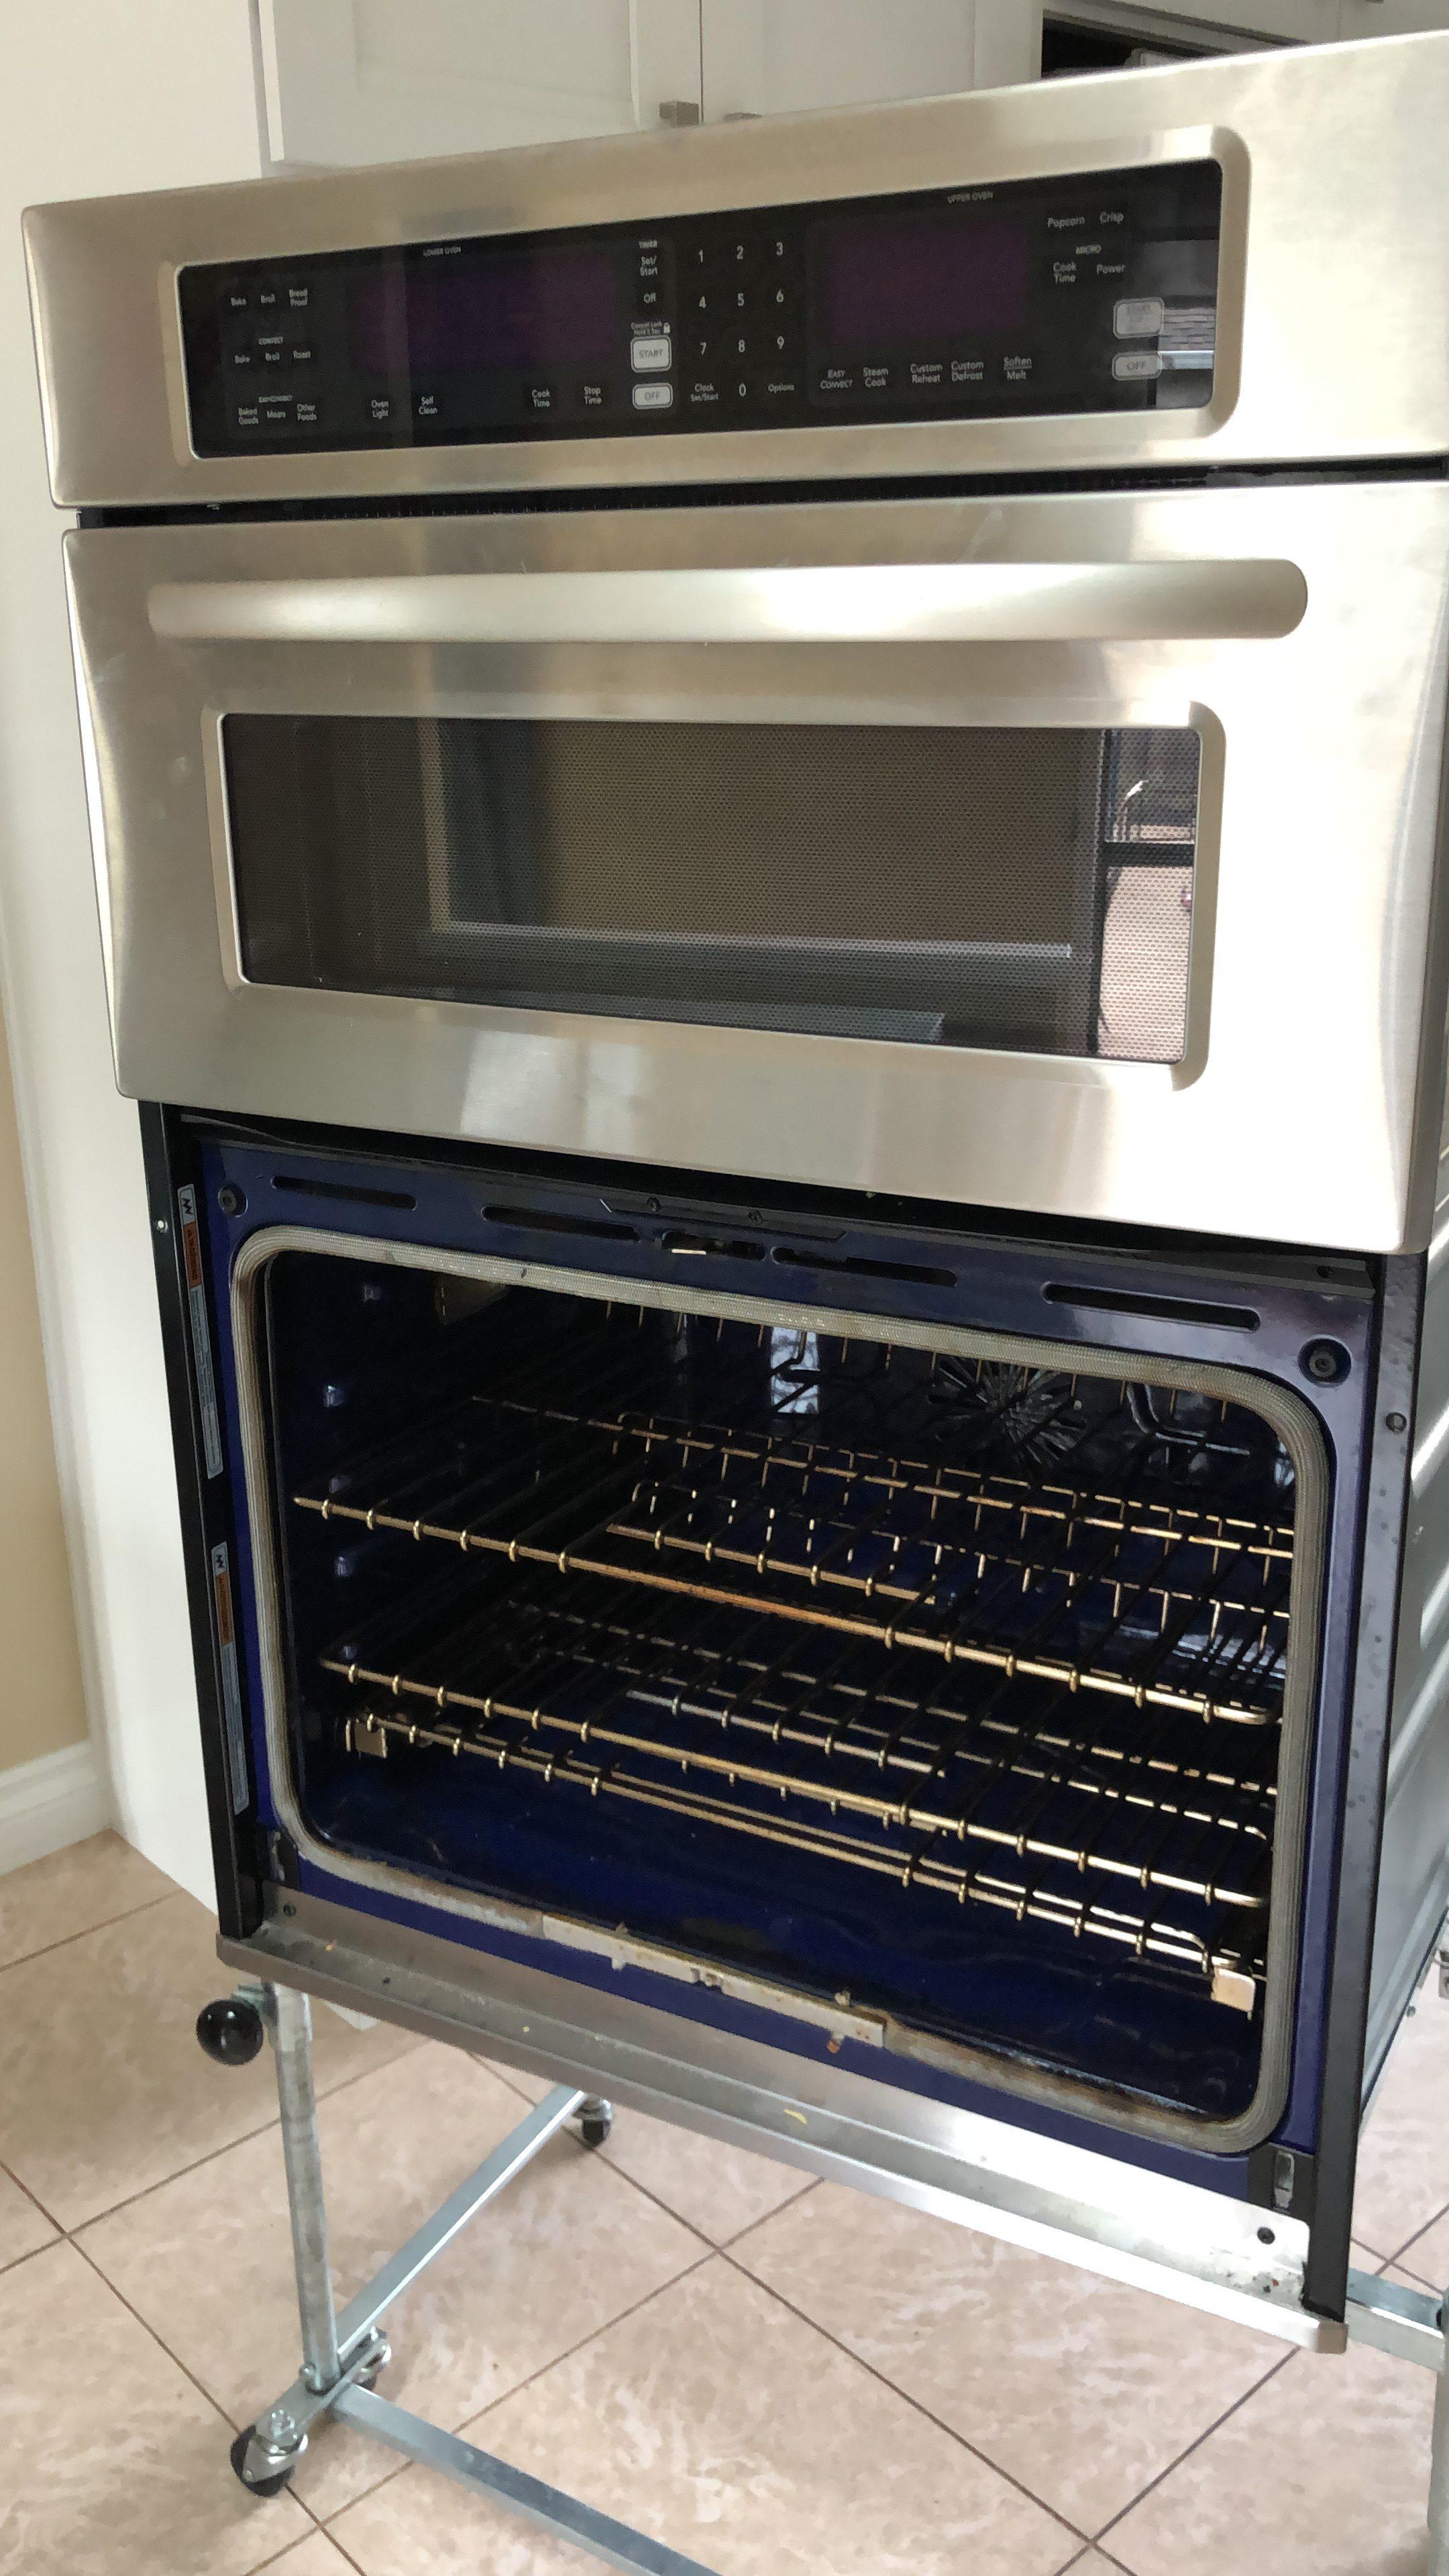 Picture of FixEm Appliance Repair fixed this built-in oven which was overheating. - FixEm Appliance Repair